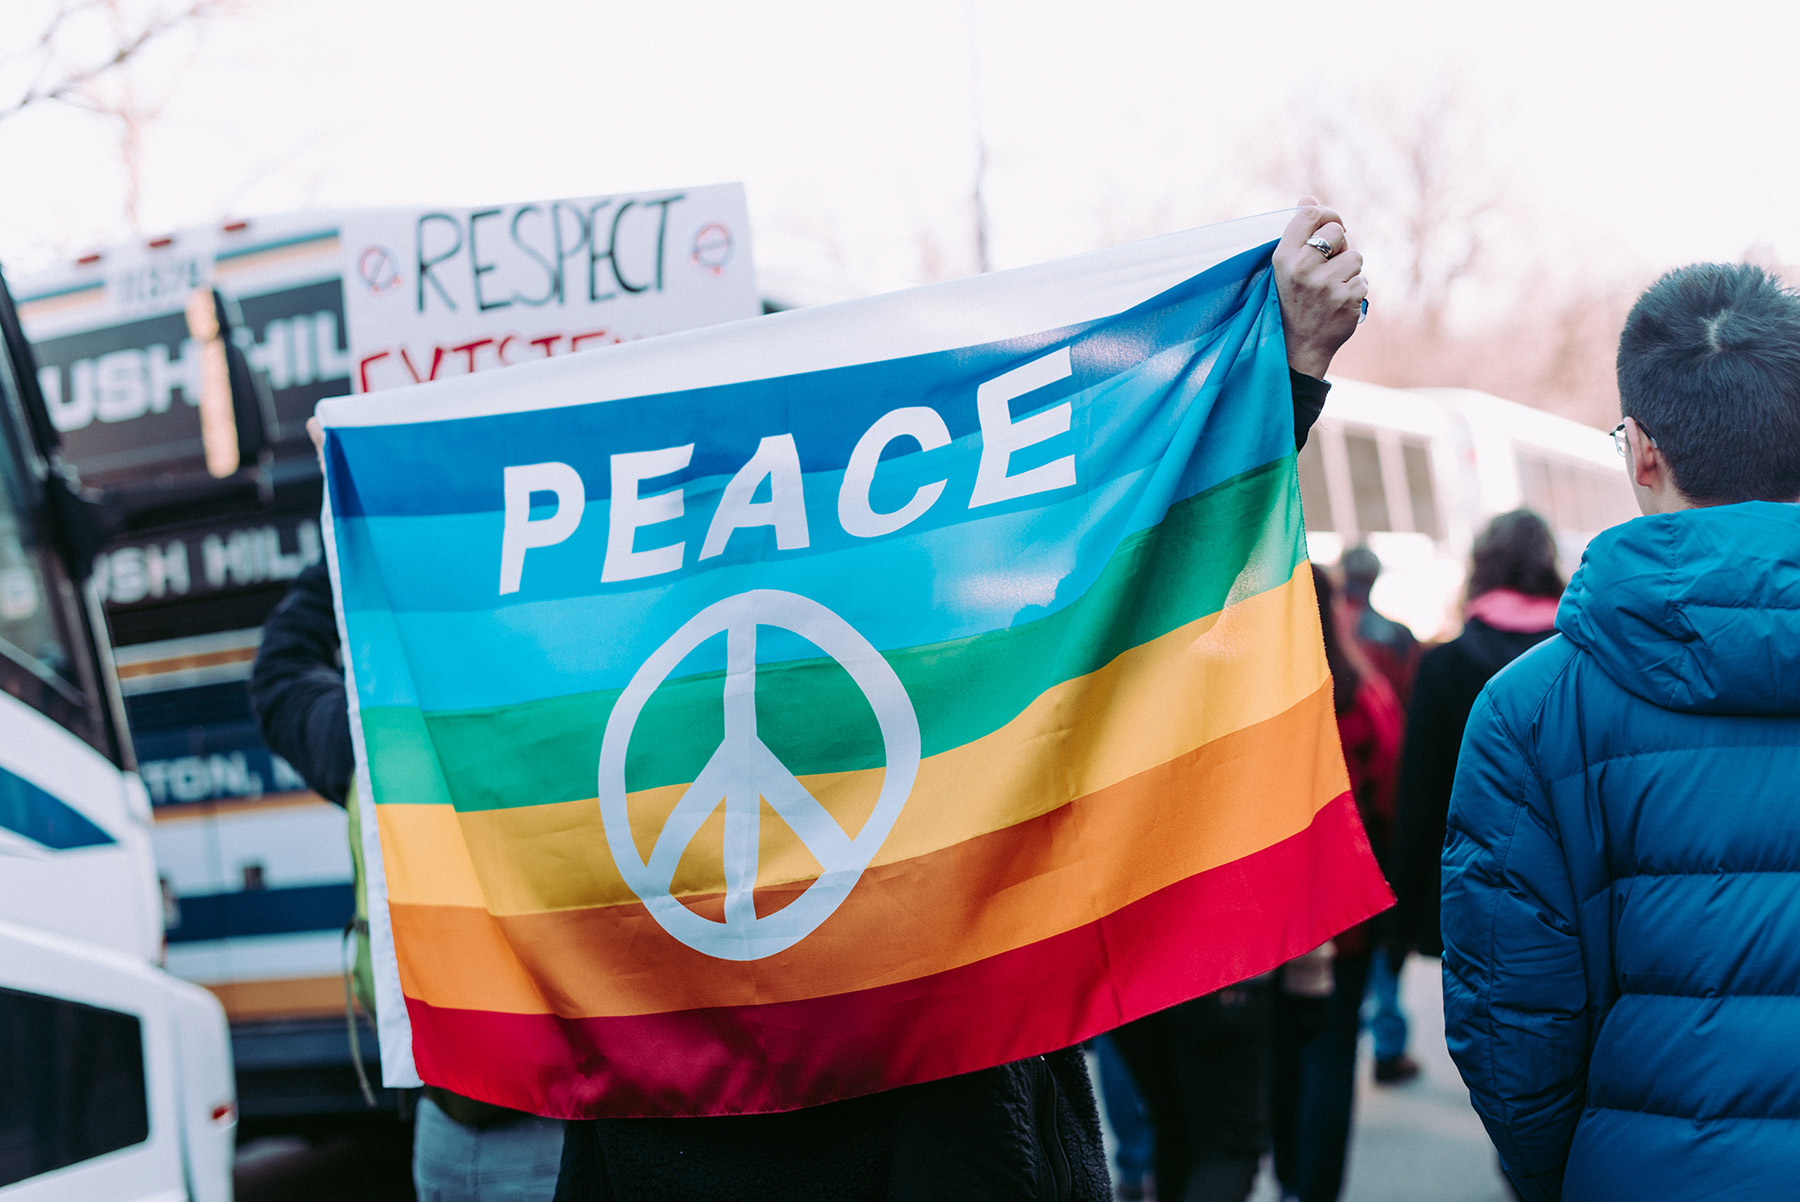 A rainbow flag reading 'Peace' is held up at a protest